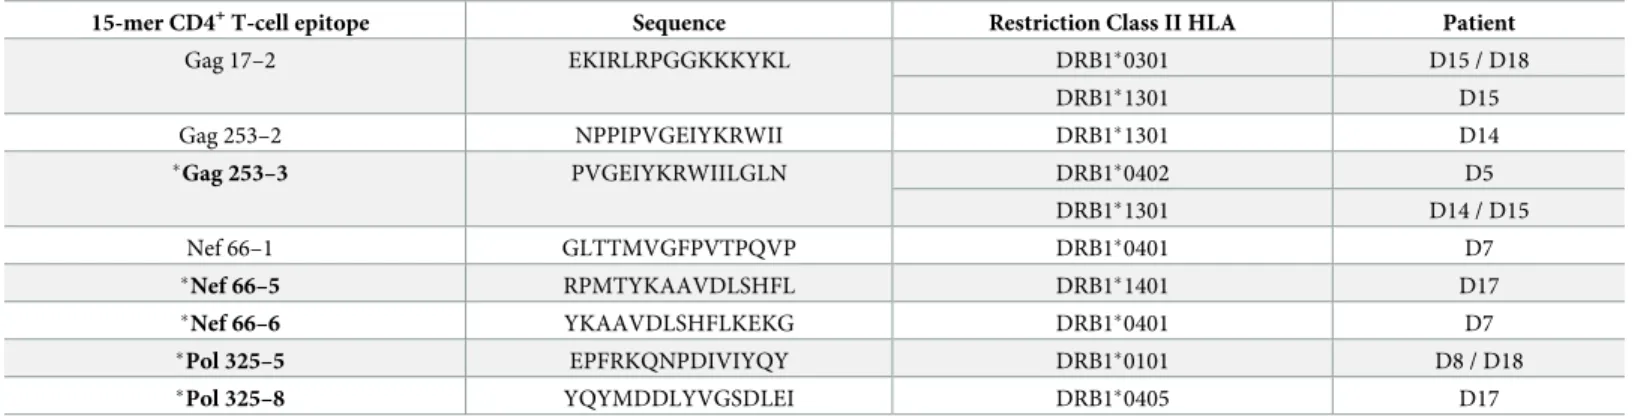 Table 1. List of new HLA-DR-restricted CD4 + T-cell epitopes identified.